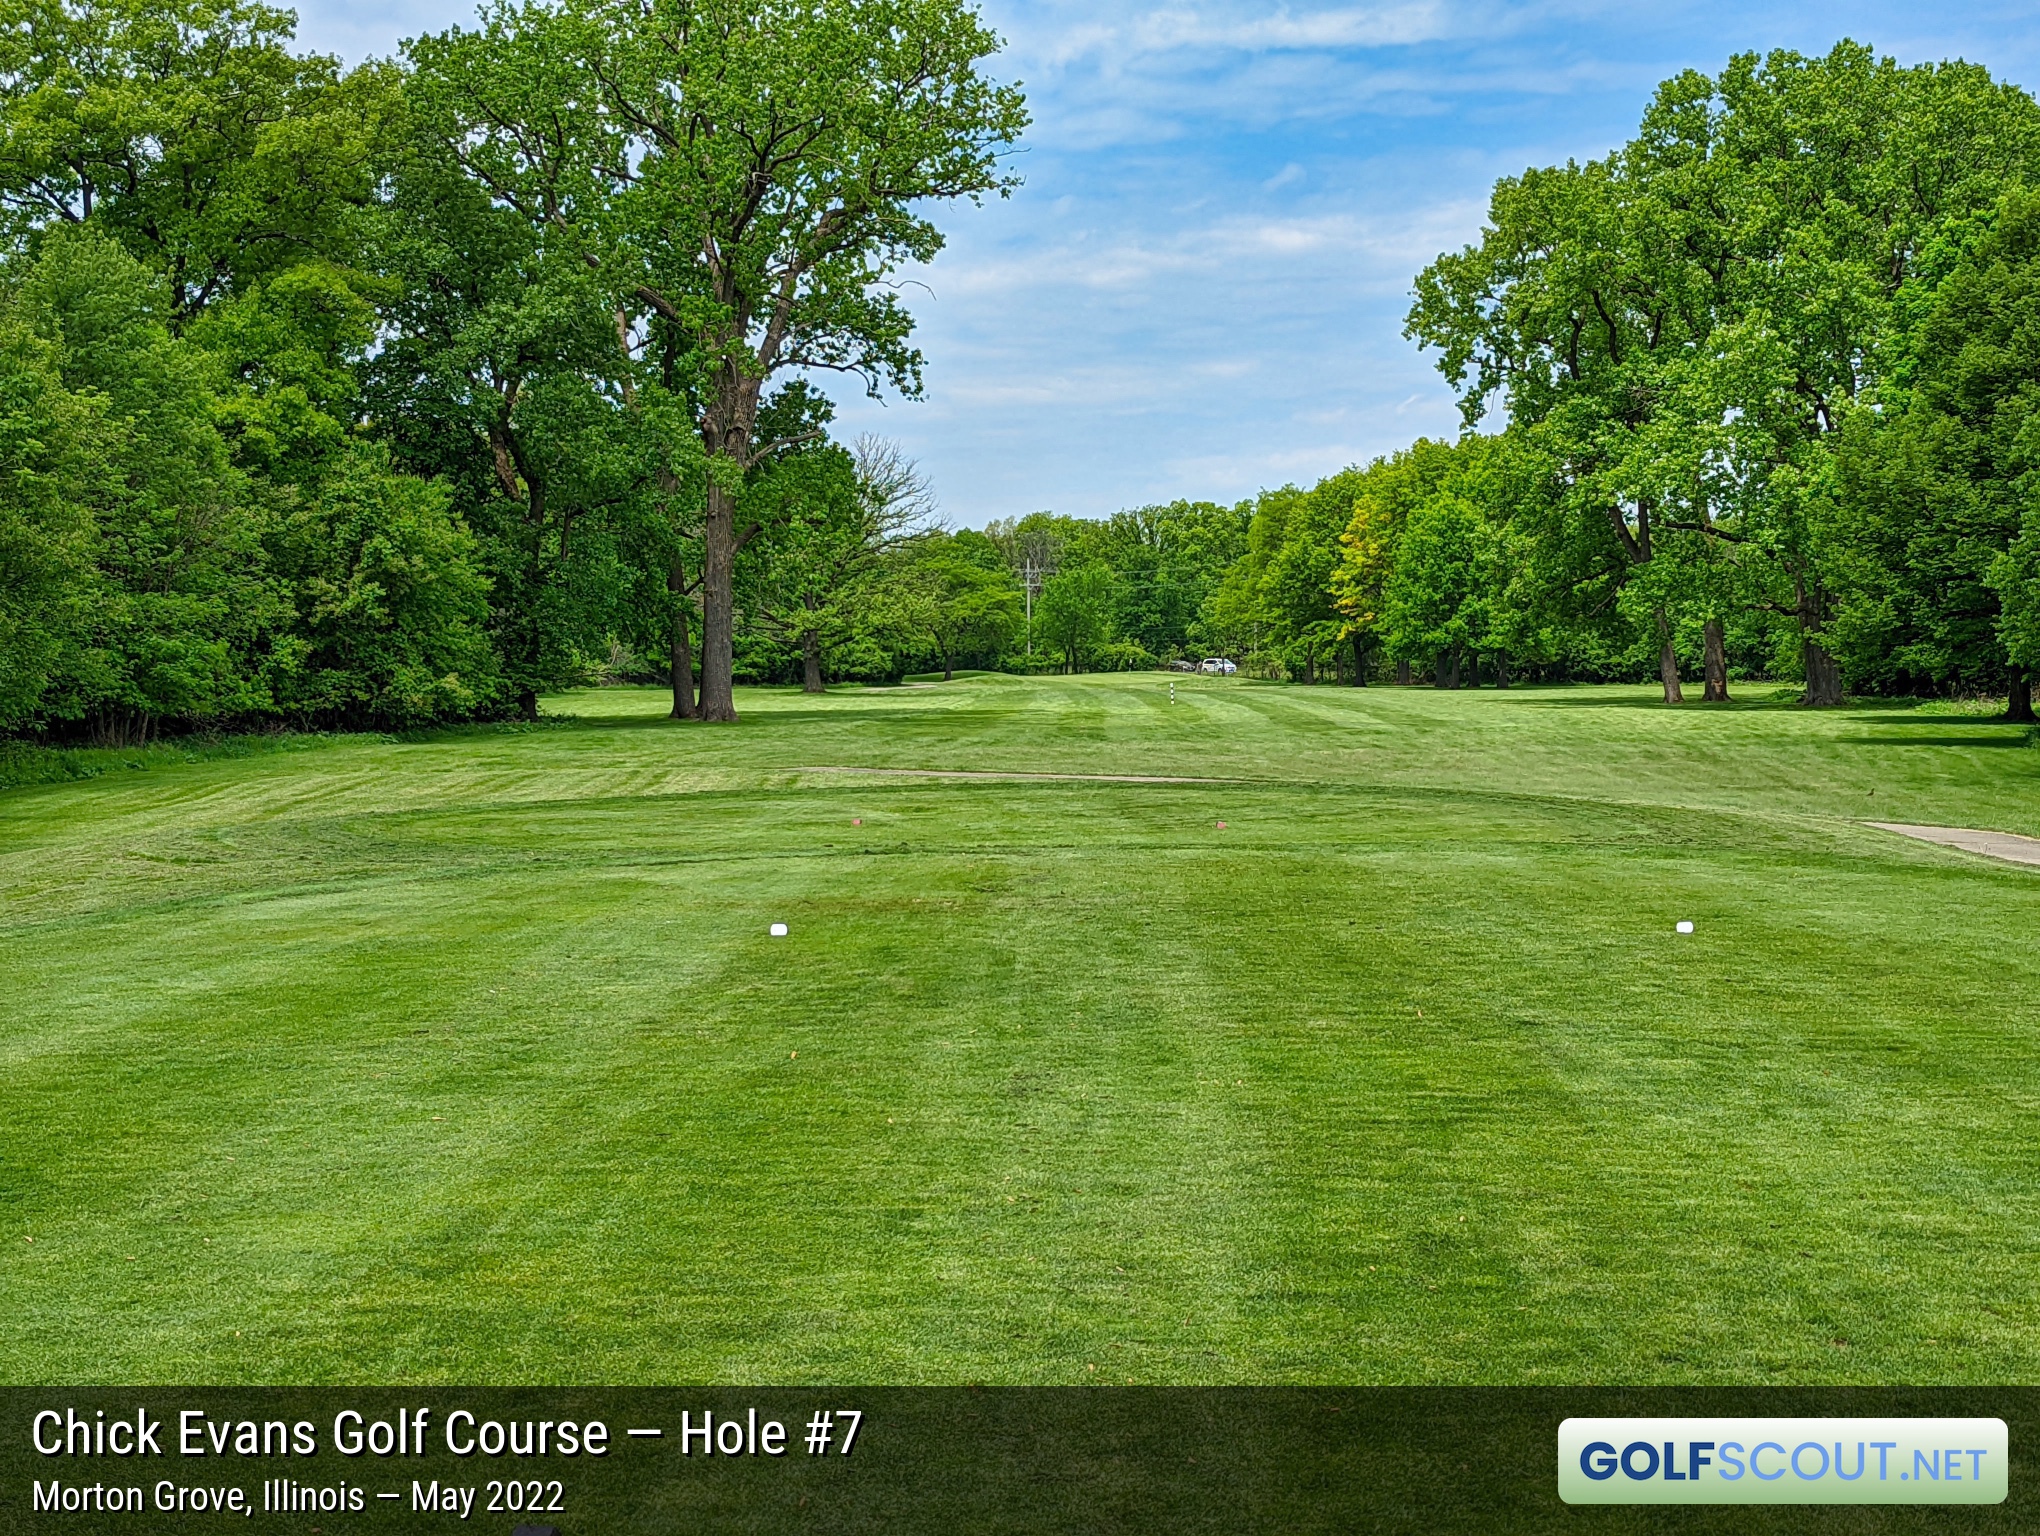 Photo of hole #7 at Chick Evans Golf Course in Morton Grove, Illinois. 